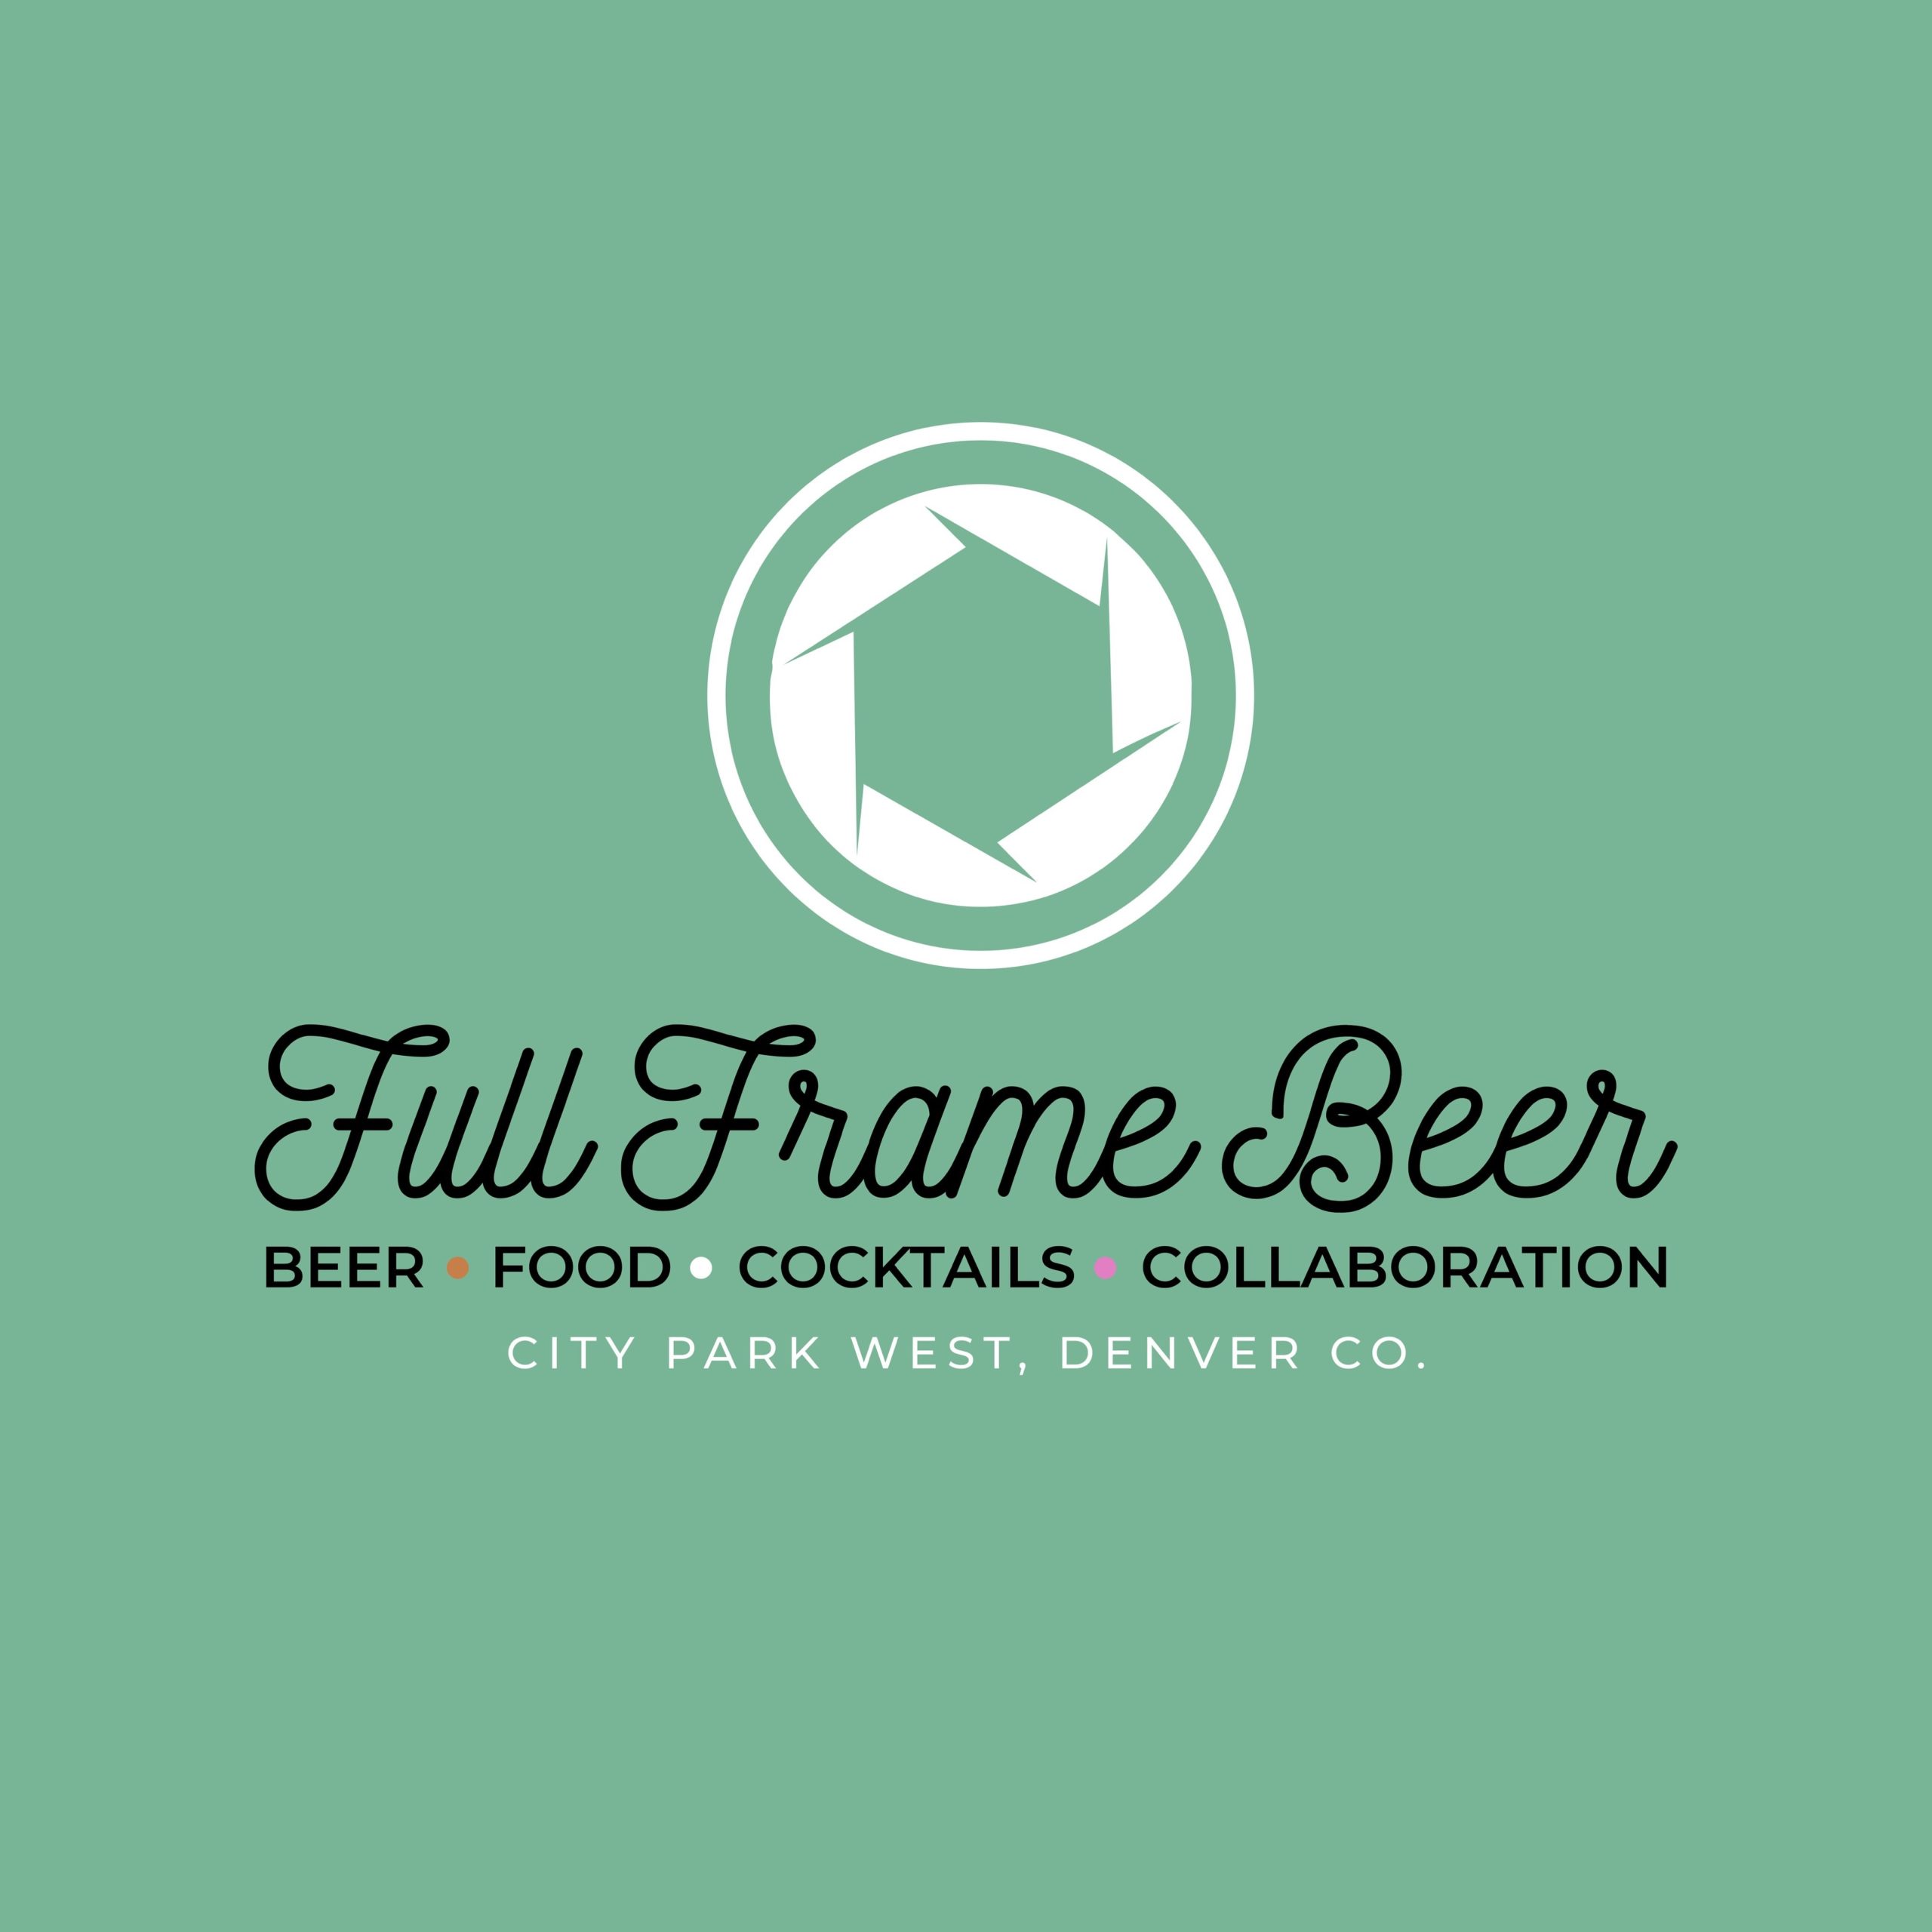 Denver Brewers Team up to Launch Full Frame Beer